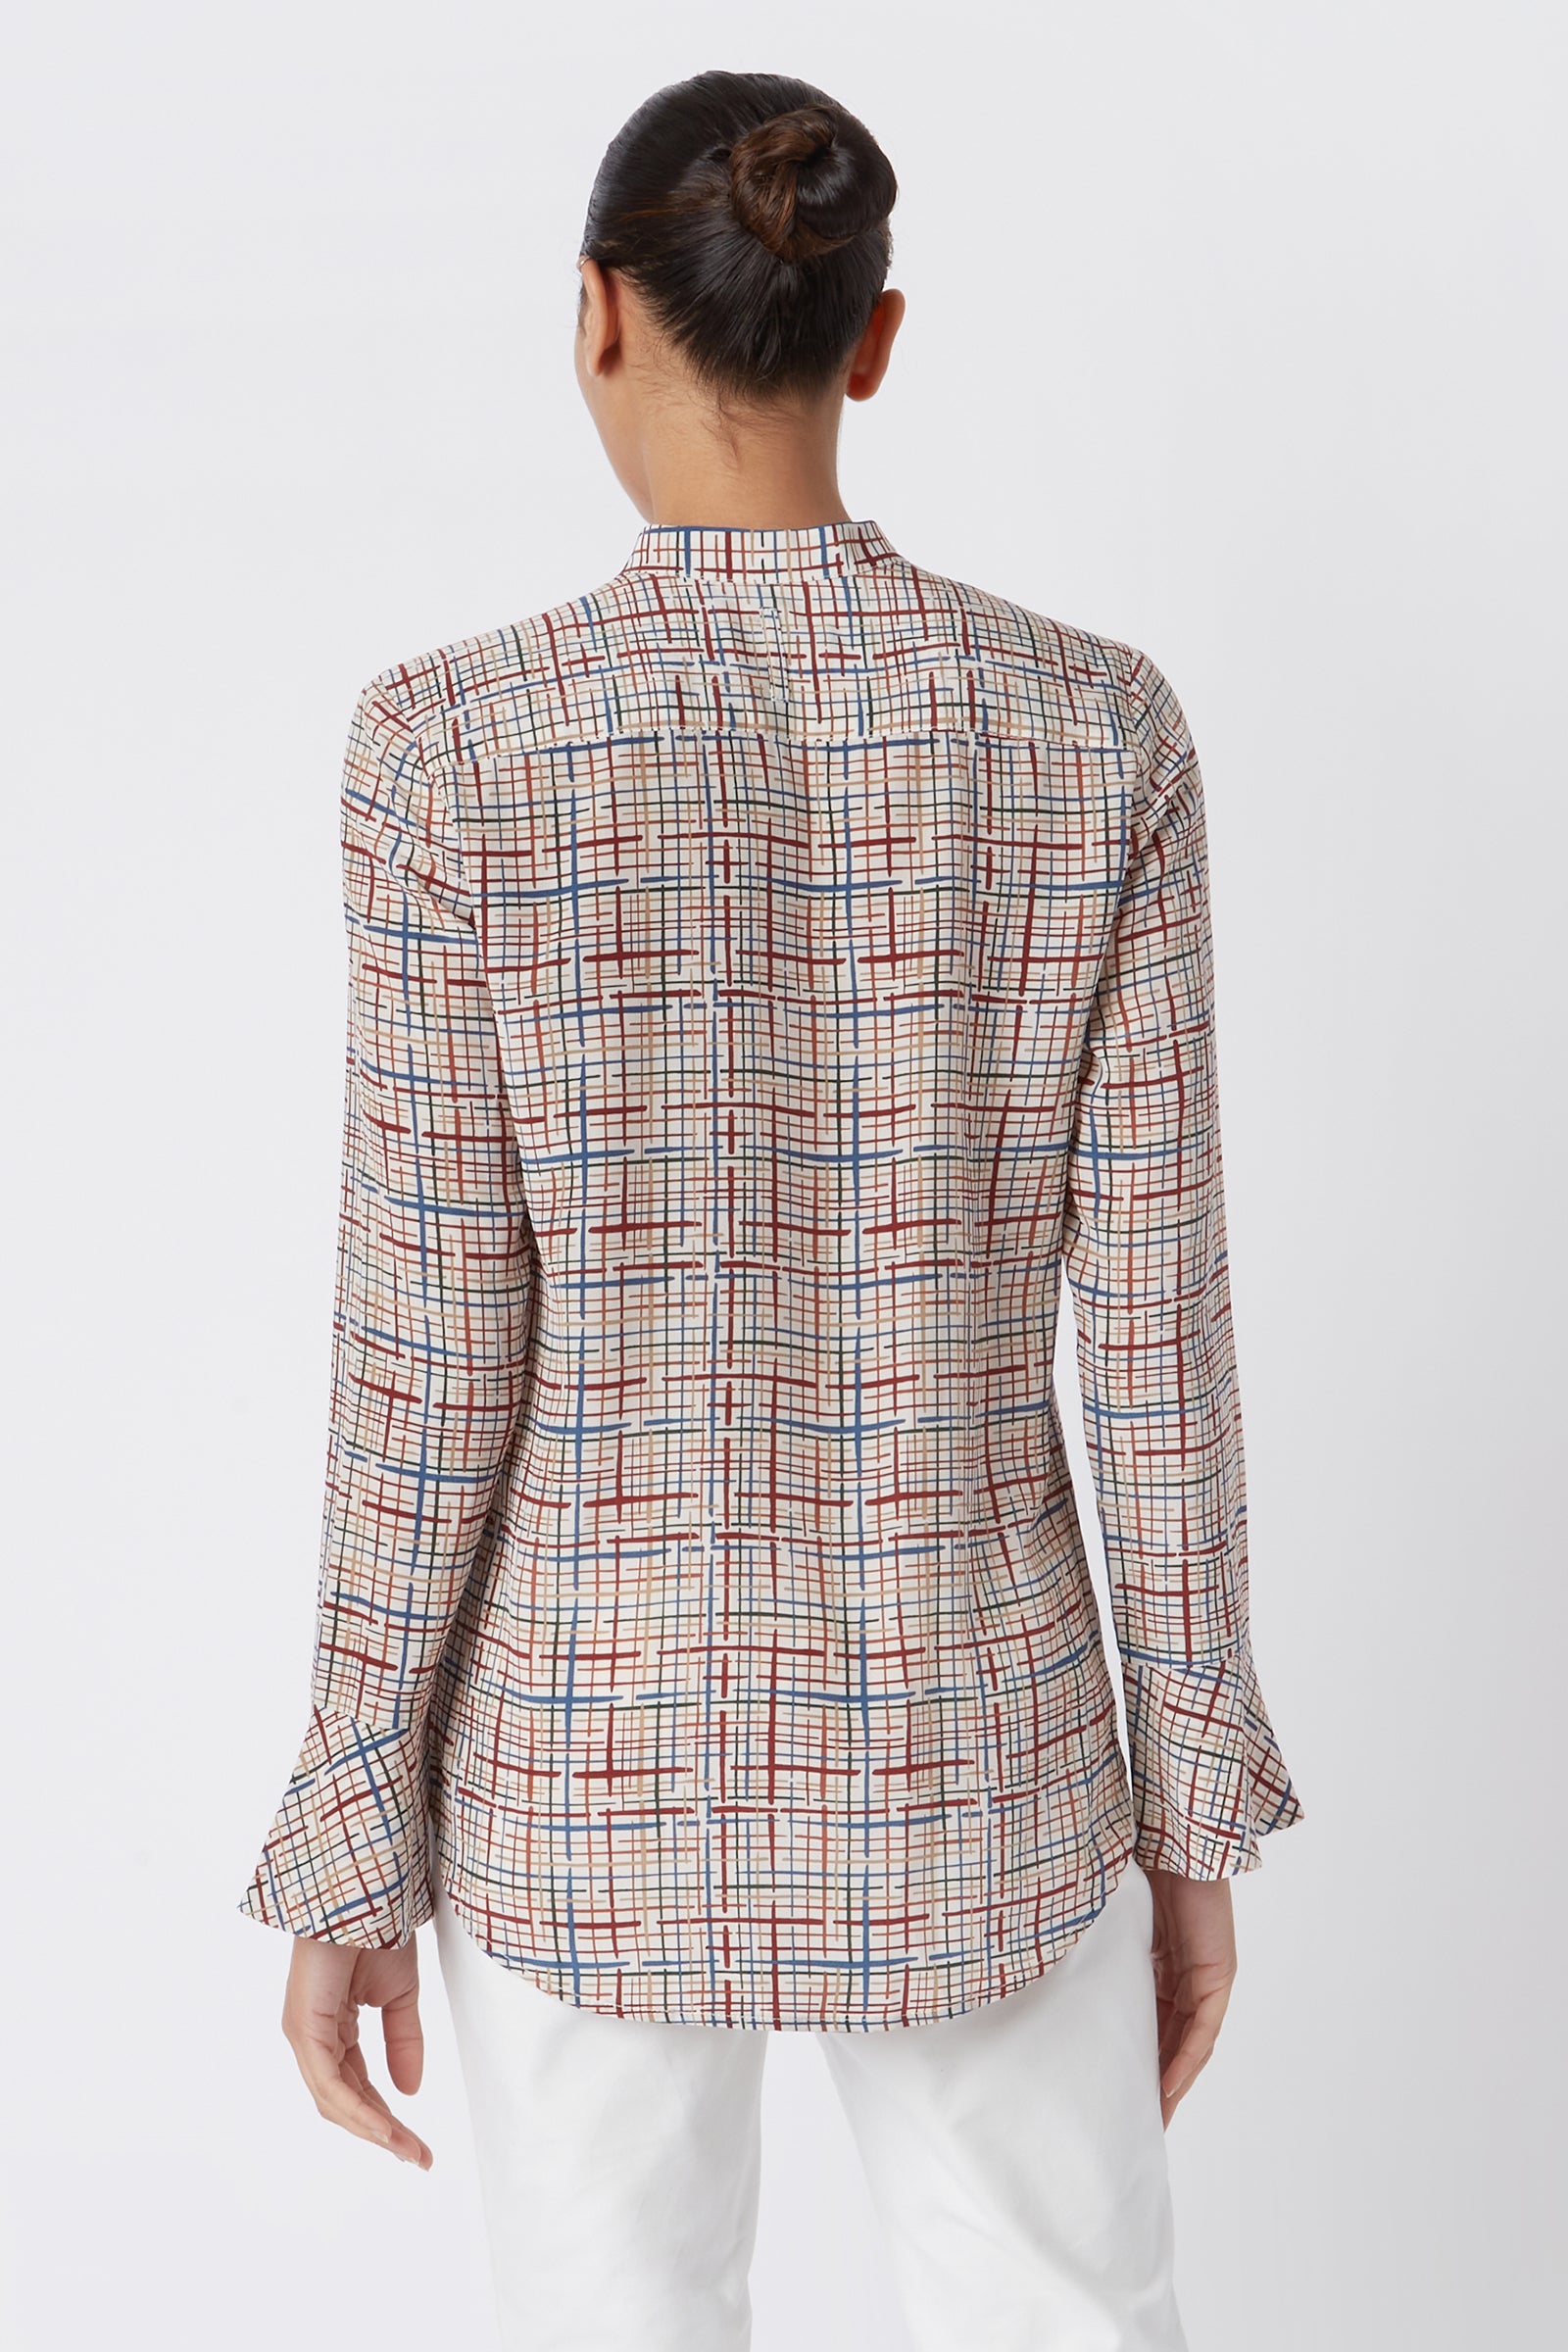 Kal Rieman Juliet Band Collar Blouse in Sketch Plaid on Model Cropped Front View